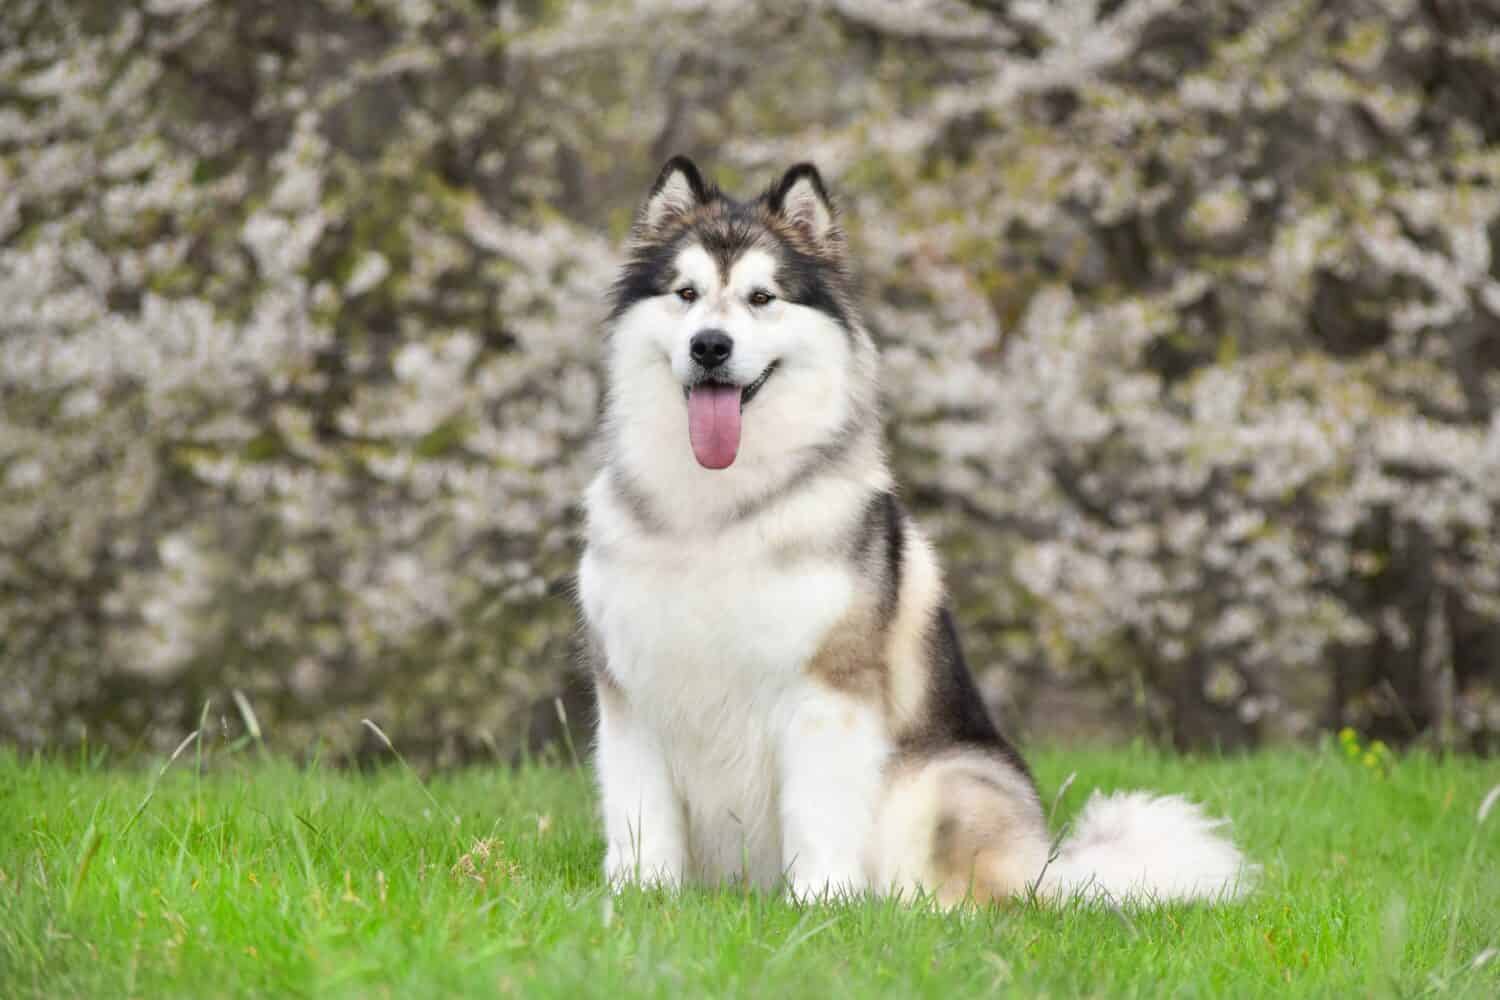 Alaskan Malamute dog sits on green grass against the background of a flowering tree